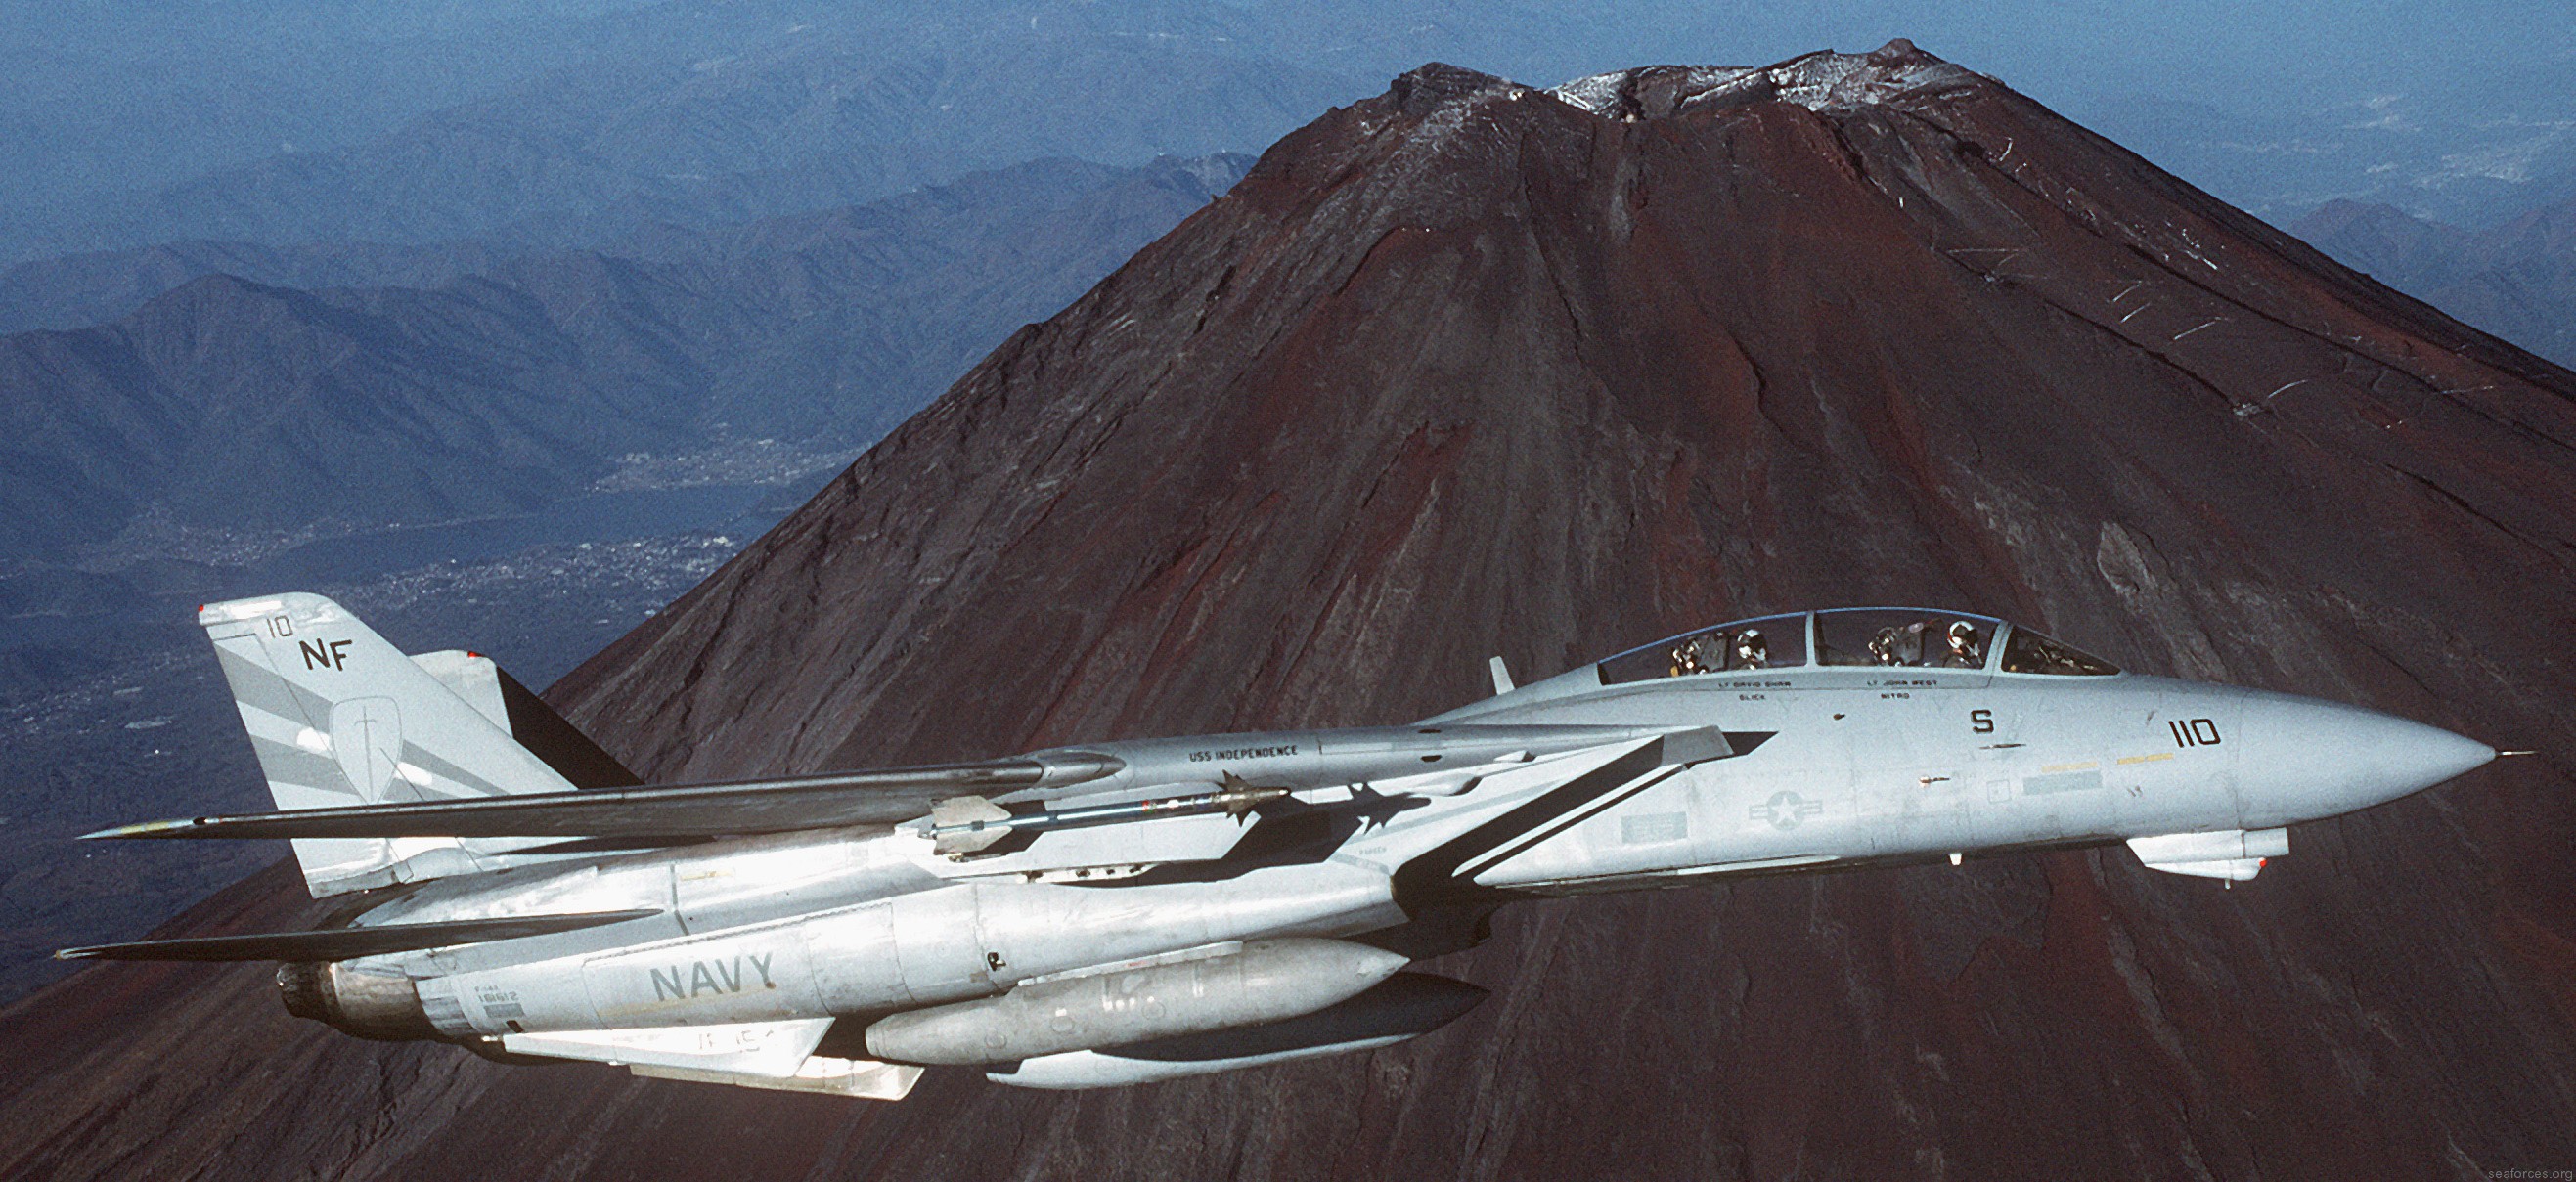 vf-154 black knights fighter squadron us navy f-14a tomcat carrier air wing cvw-5 11 mount fuji japan